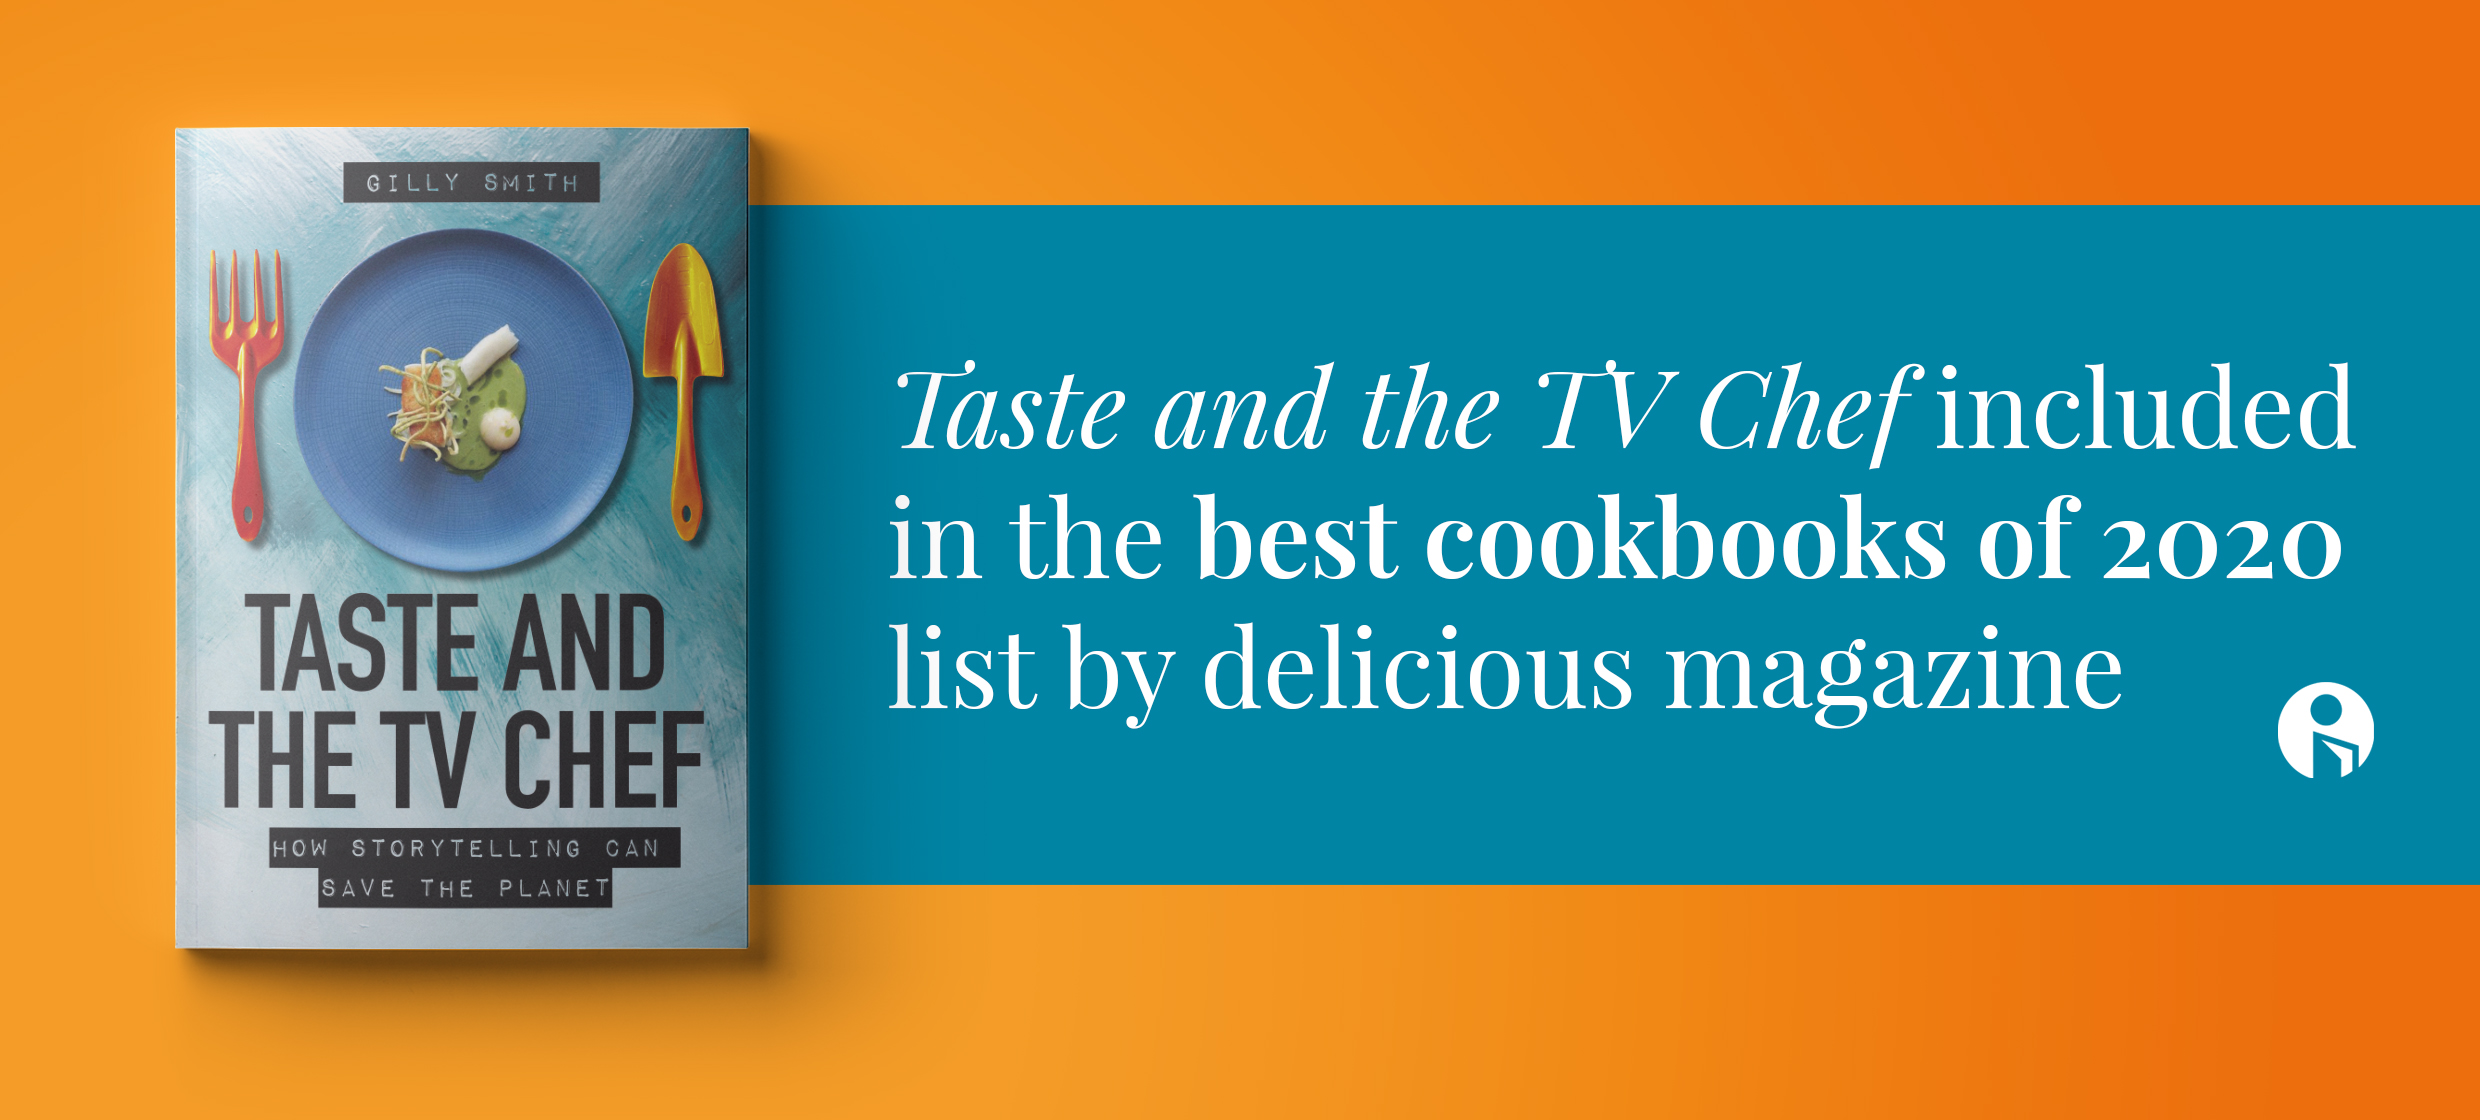 delicious magazine award (Taste and the TV chef) - Taste-nd-the-TV-Chef_Book-Mockup_2020-(1).jpg